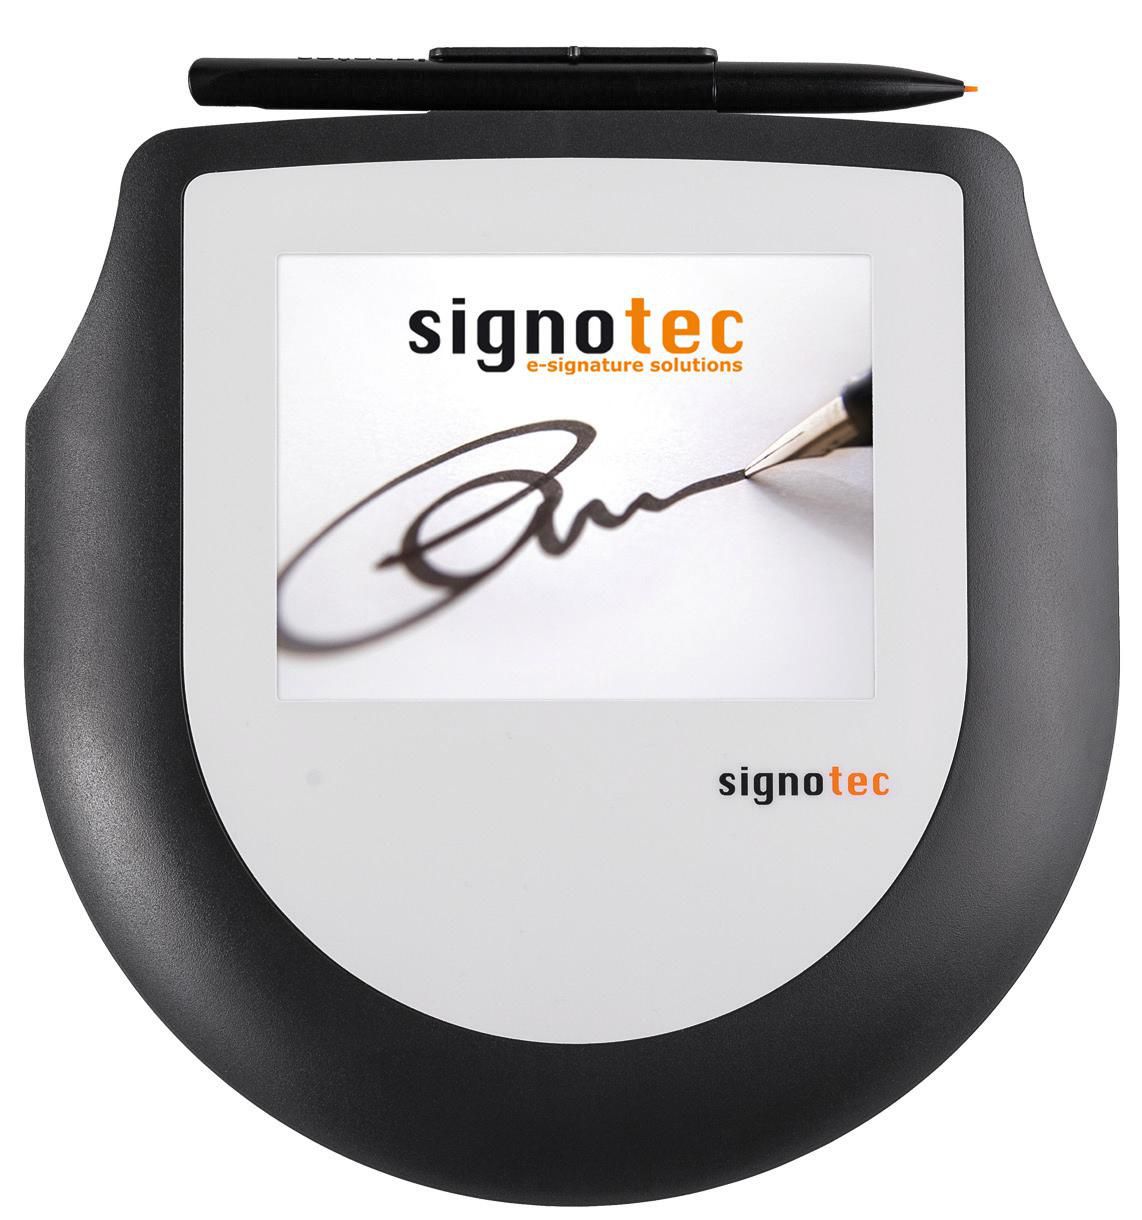 signotec ST-CE1075-2-UNFC100 Omega Colour LCD Signature Pad 